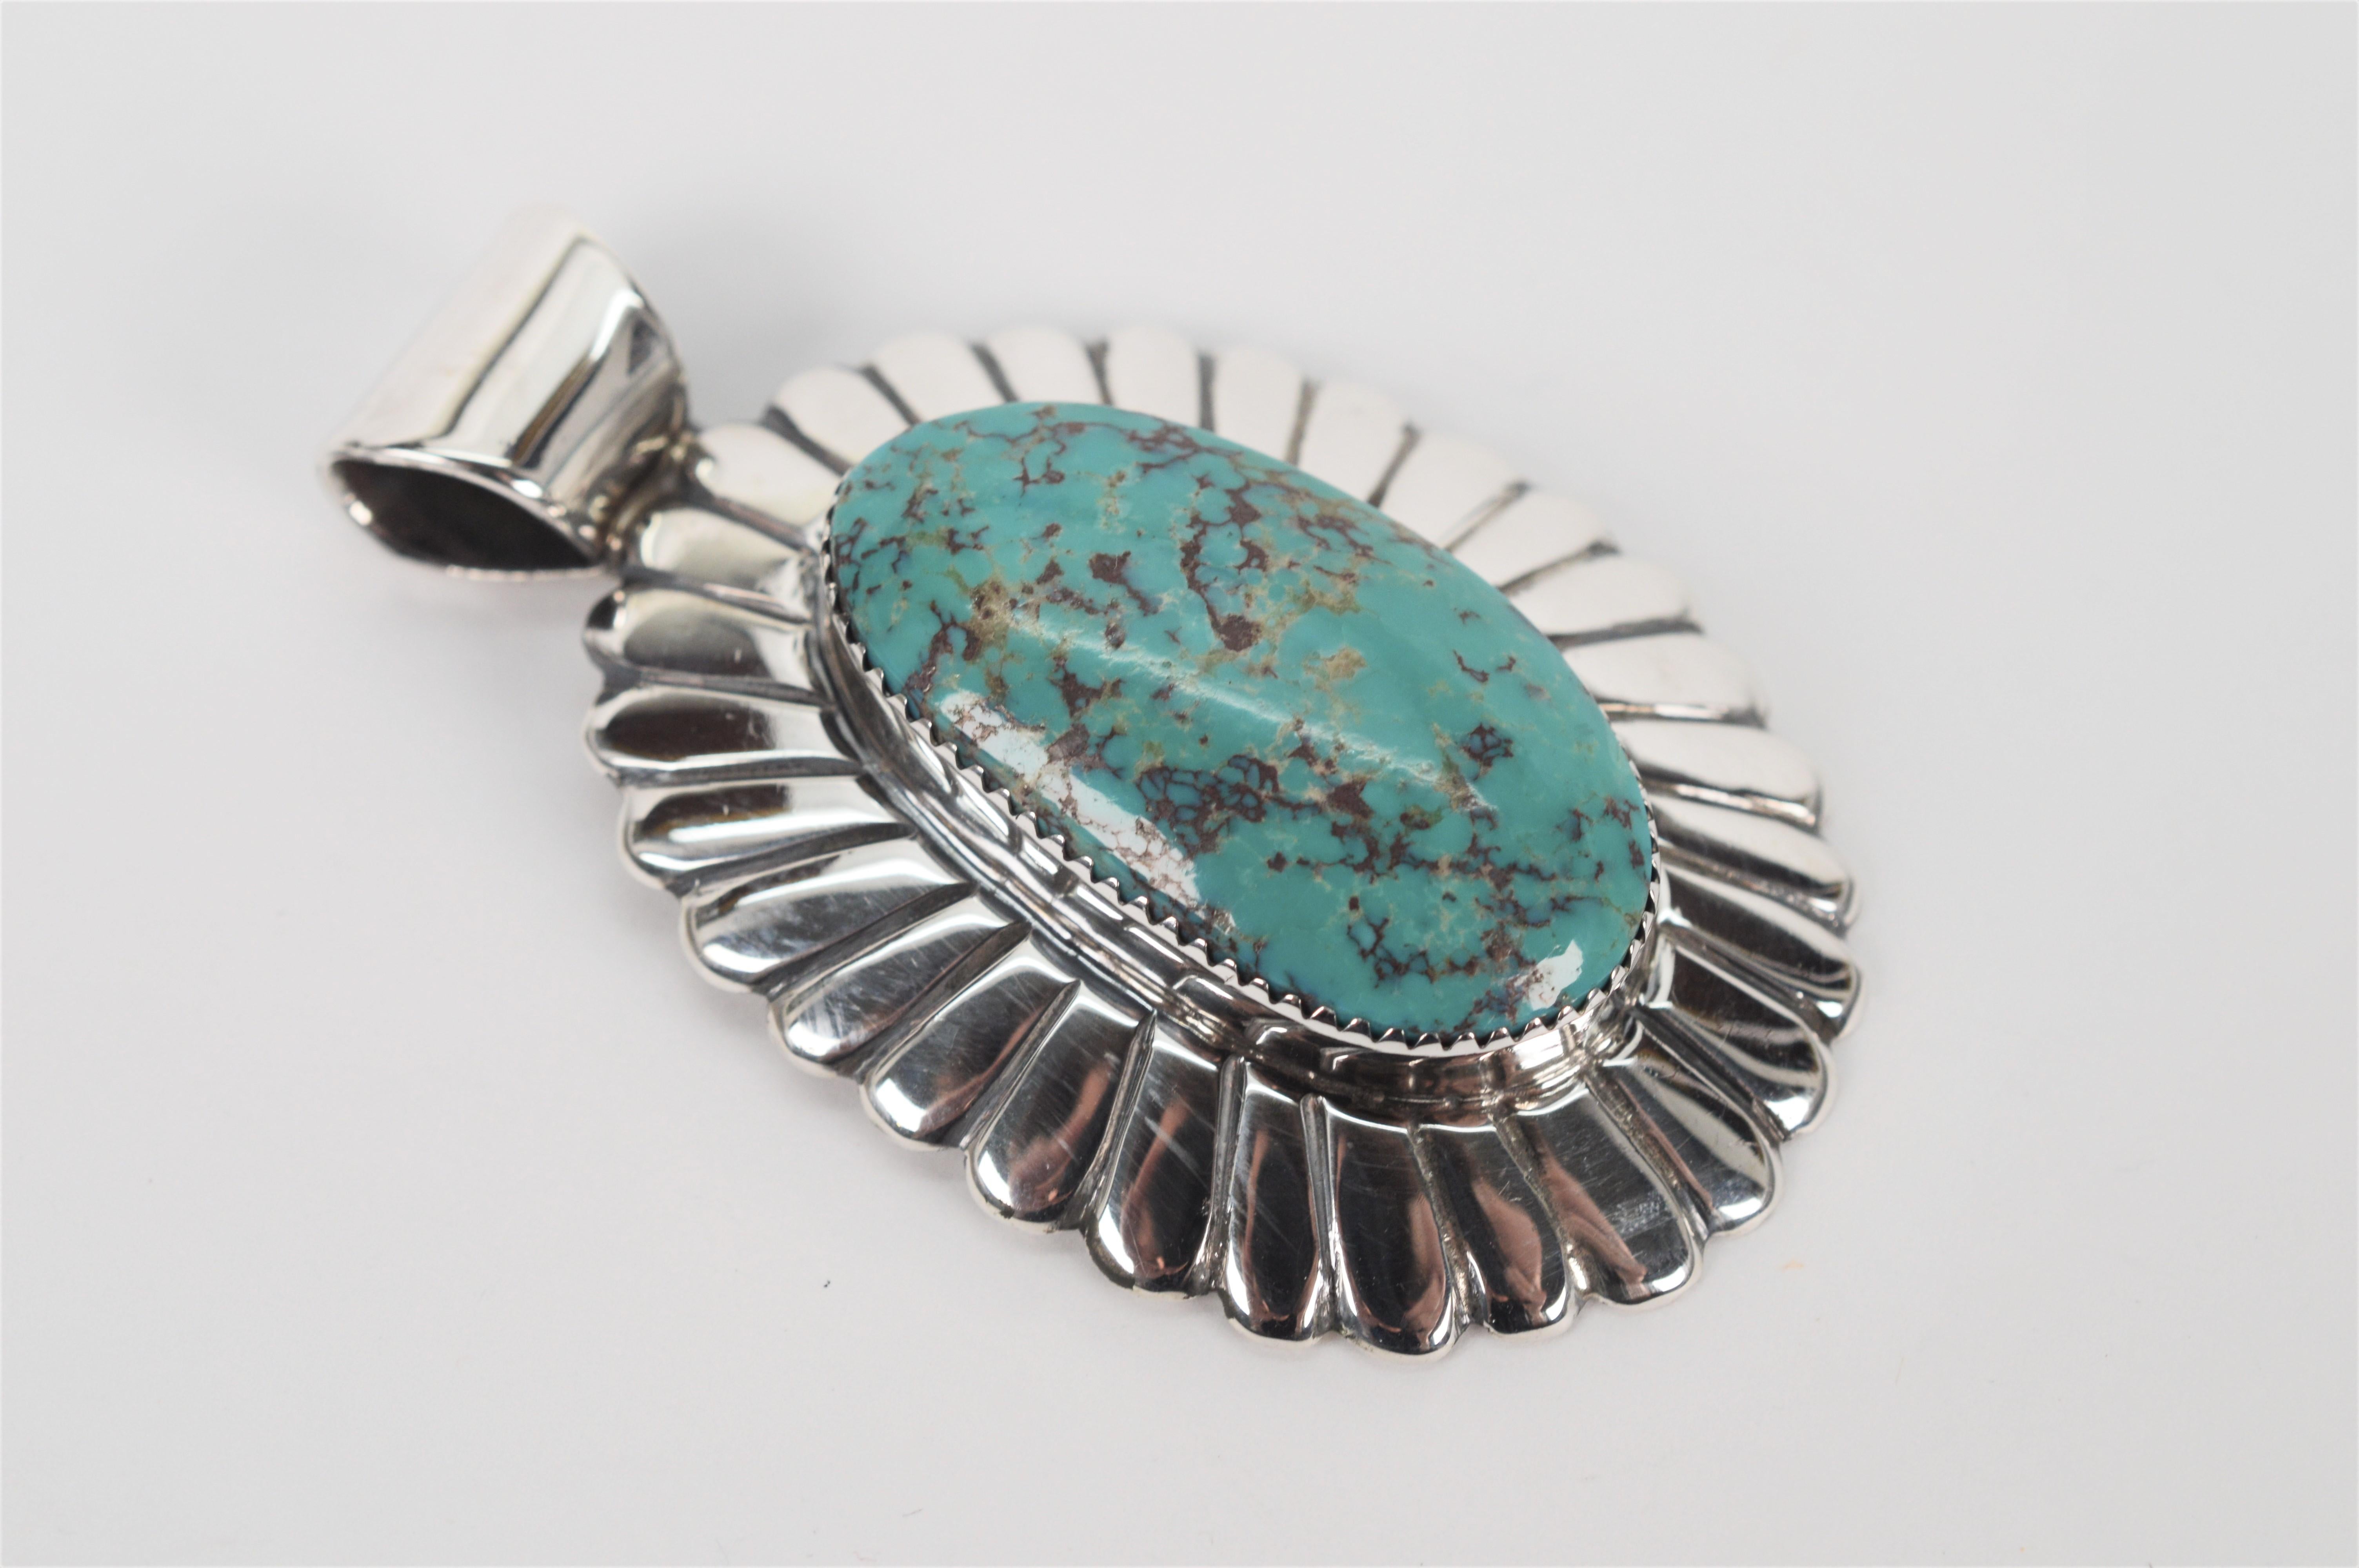 An impressive 18 x 33mm natural turquoise cabochon is featured on this thick gauge scalloped sterling silver pendant crafted by known Navajo silversmith, Arnold Blackgoat. Measuring two inches in length plus the bail and 1.5 inches in width, this